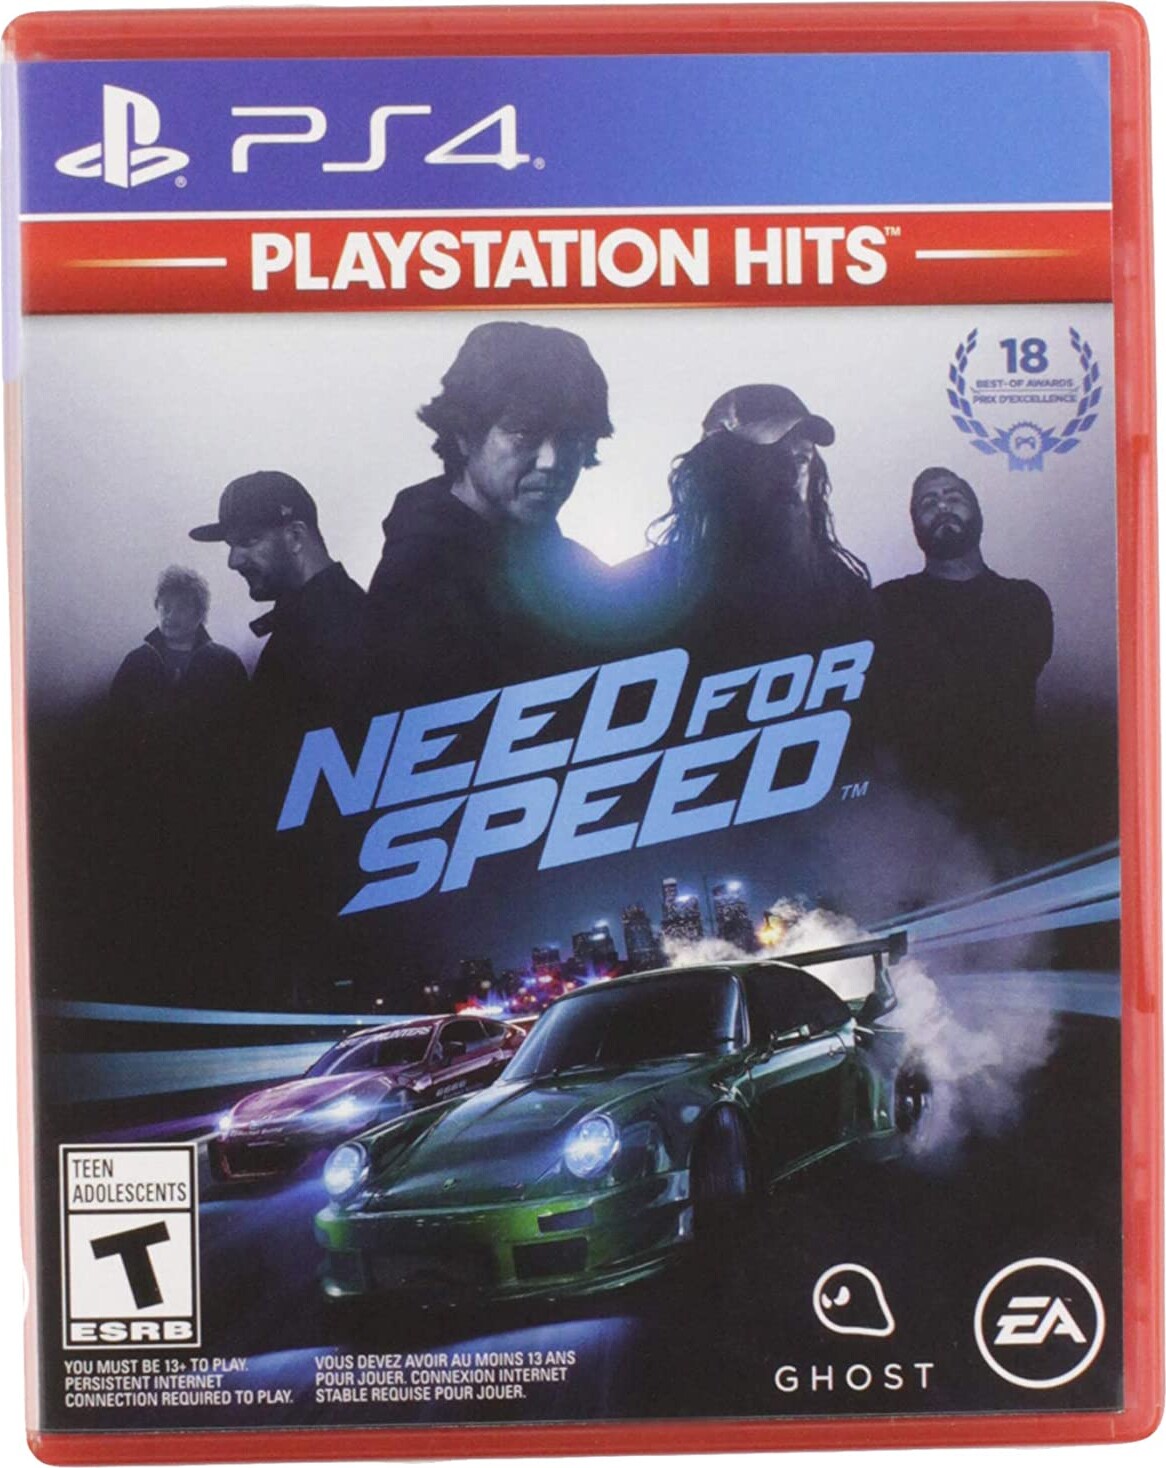 For Speed (import) - PS4 ∙ 159.95